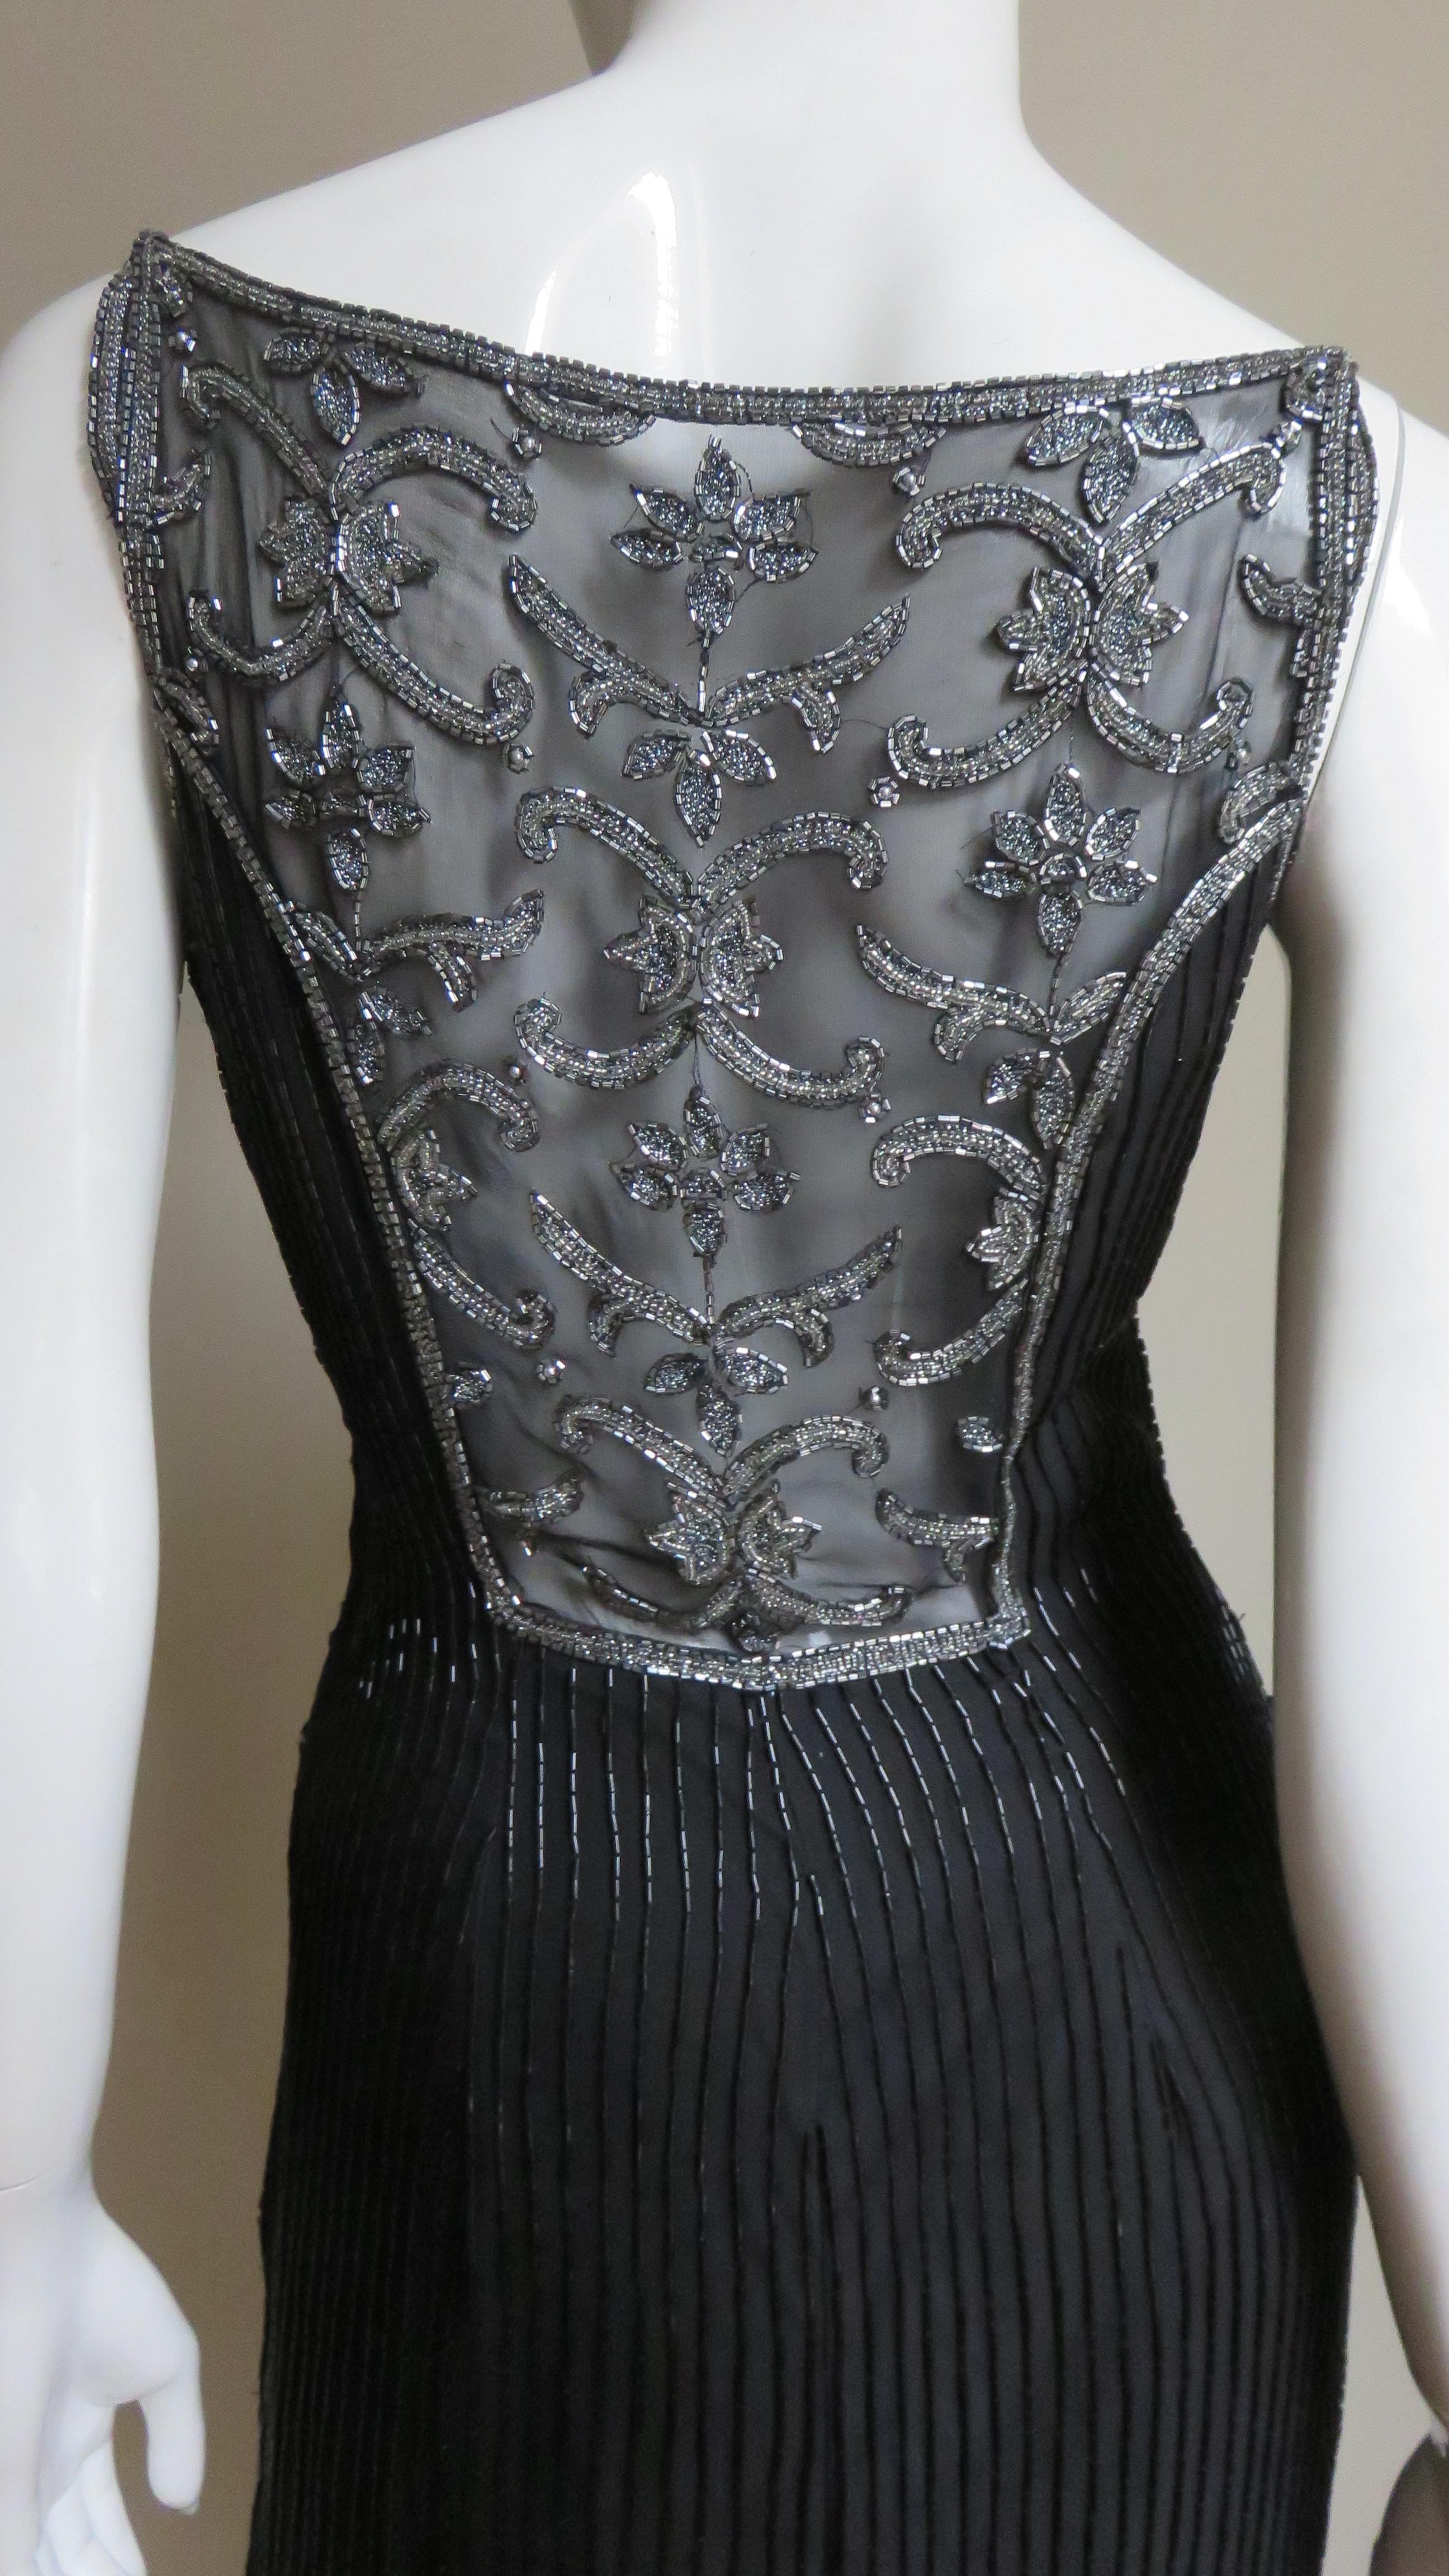 Sonia Rykiel Gown with Sheer Back and Beading 7